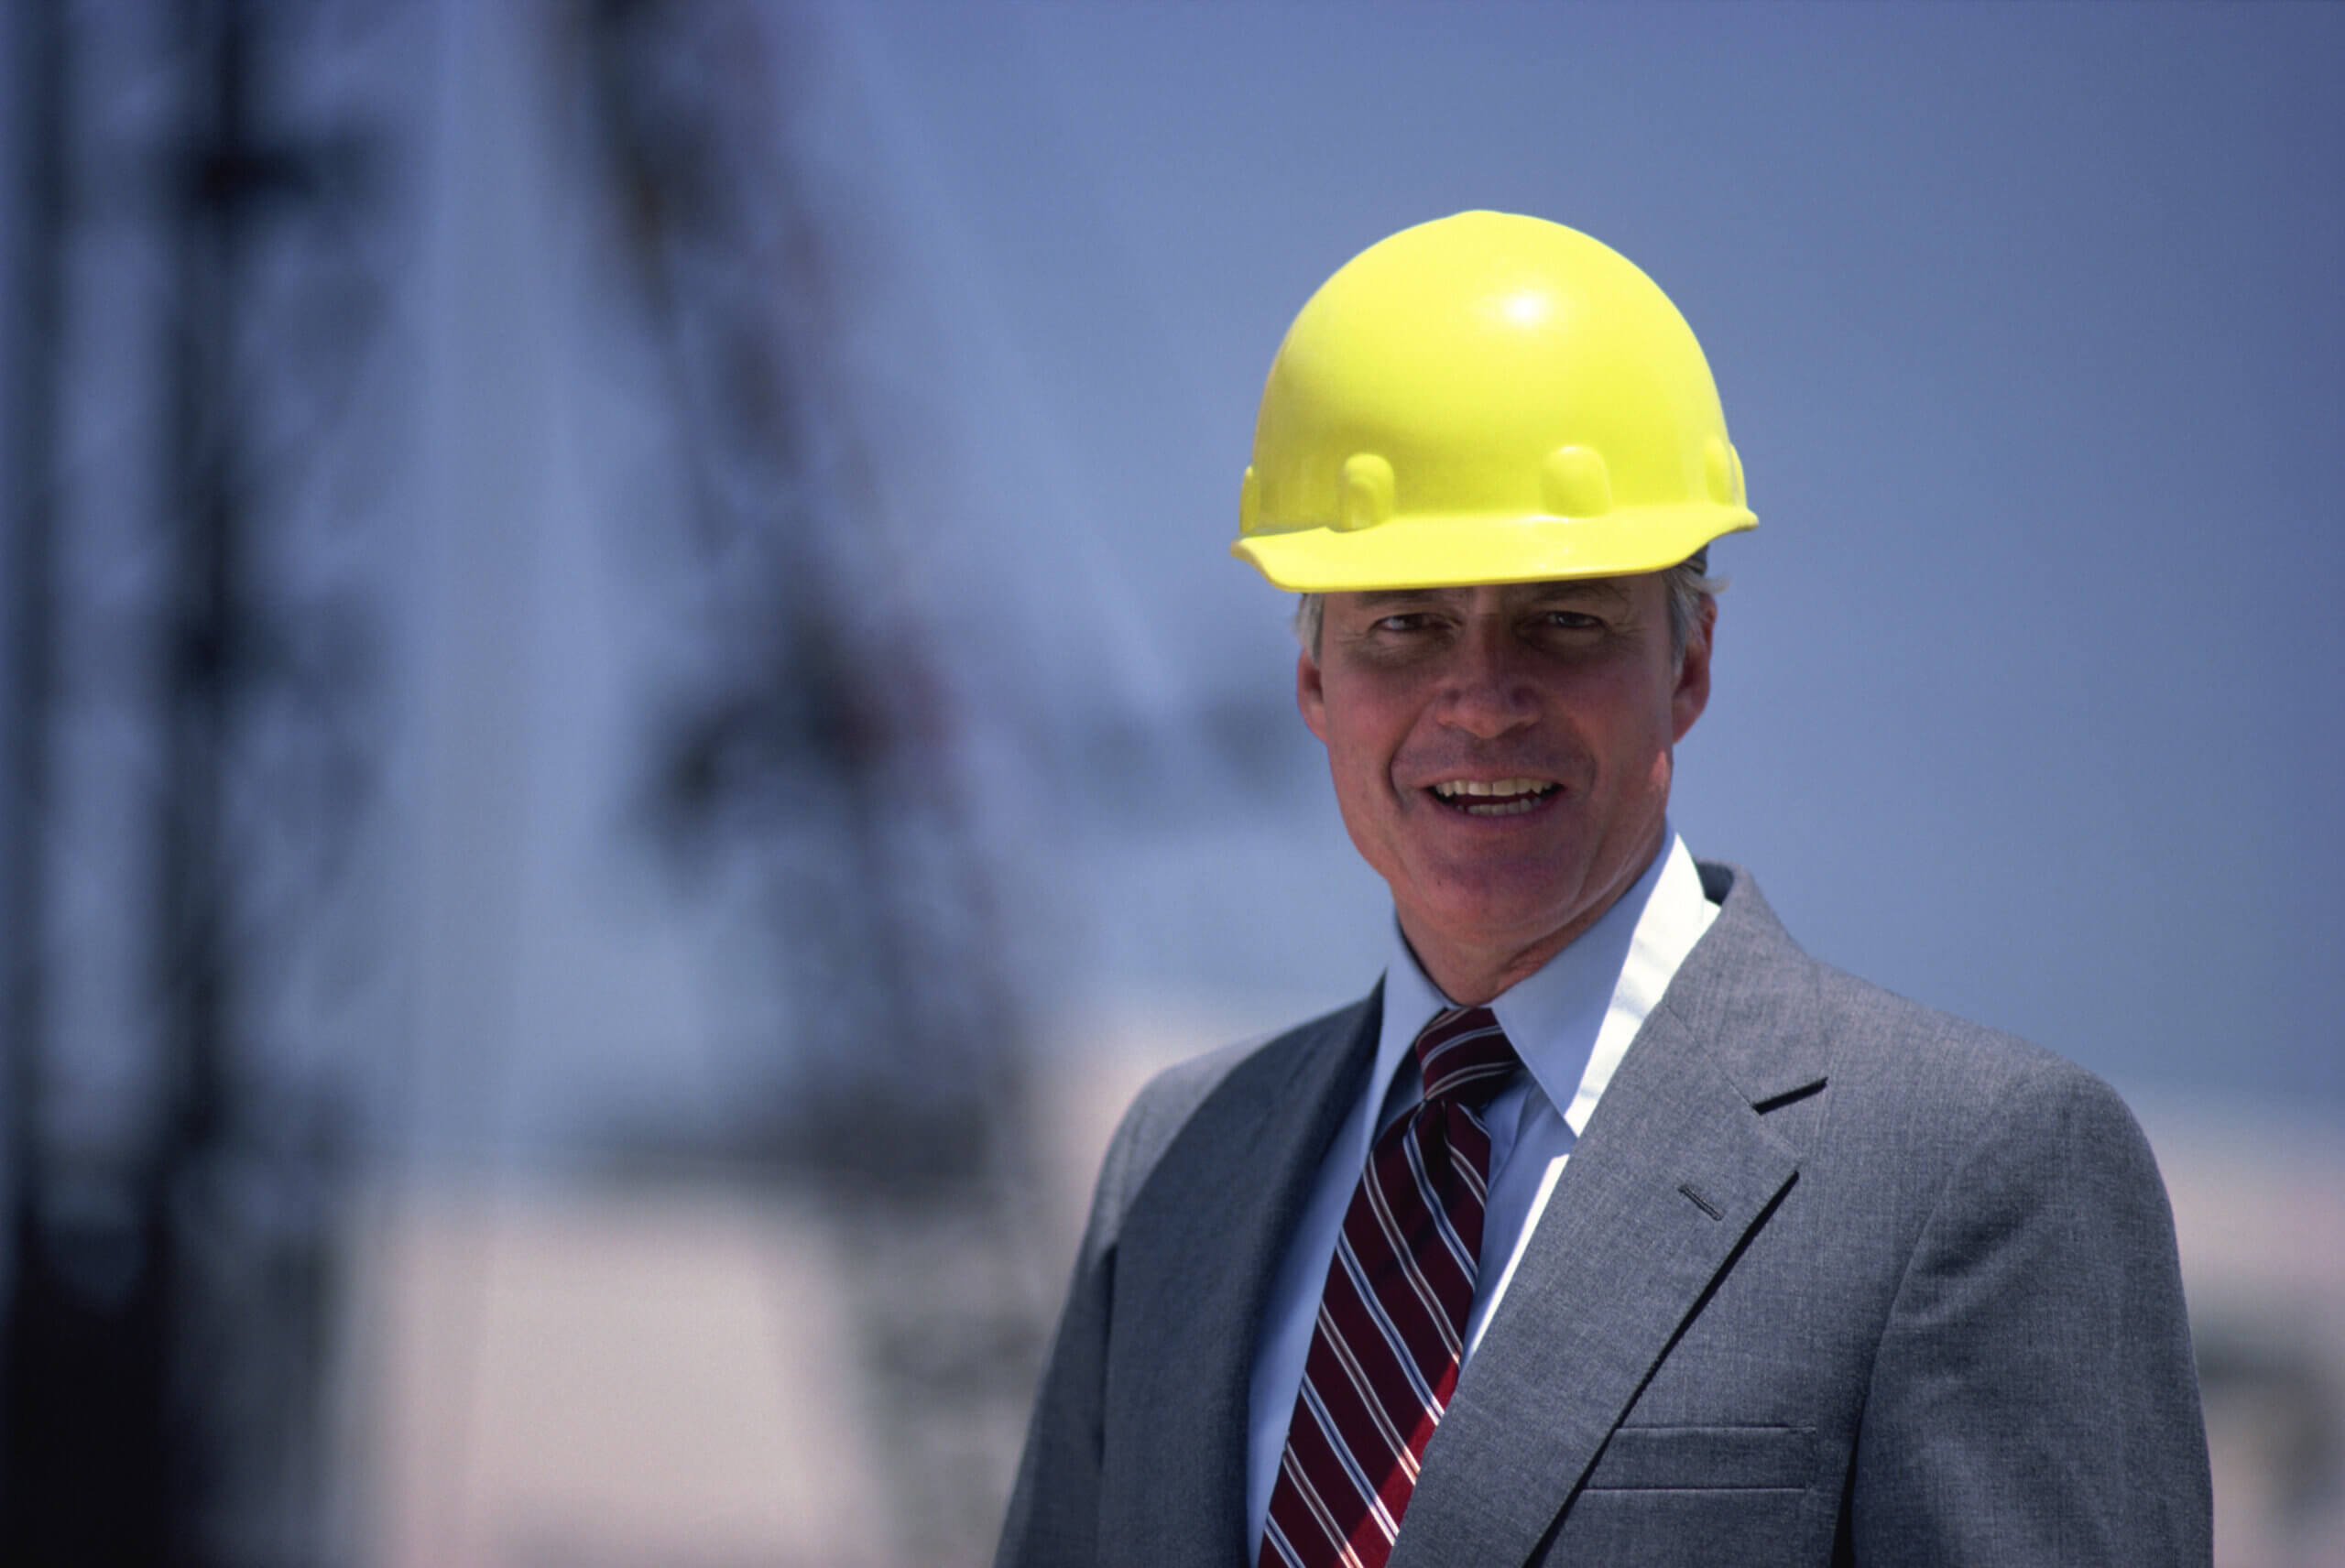 Smiling businessman with a hardhat